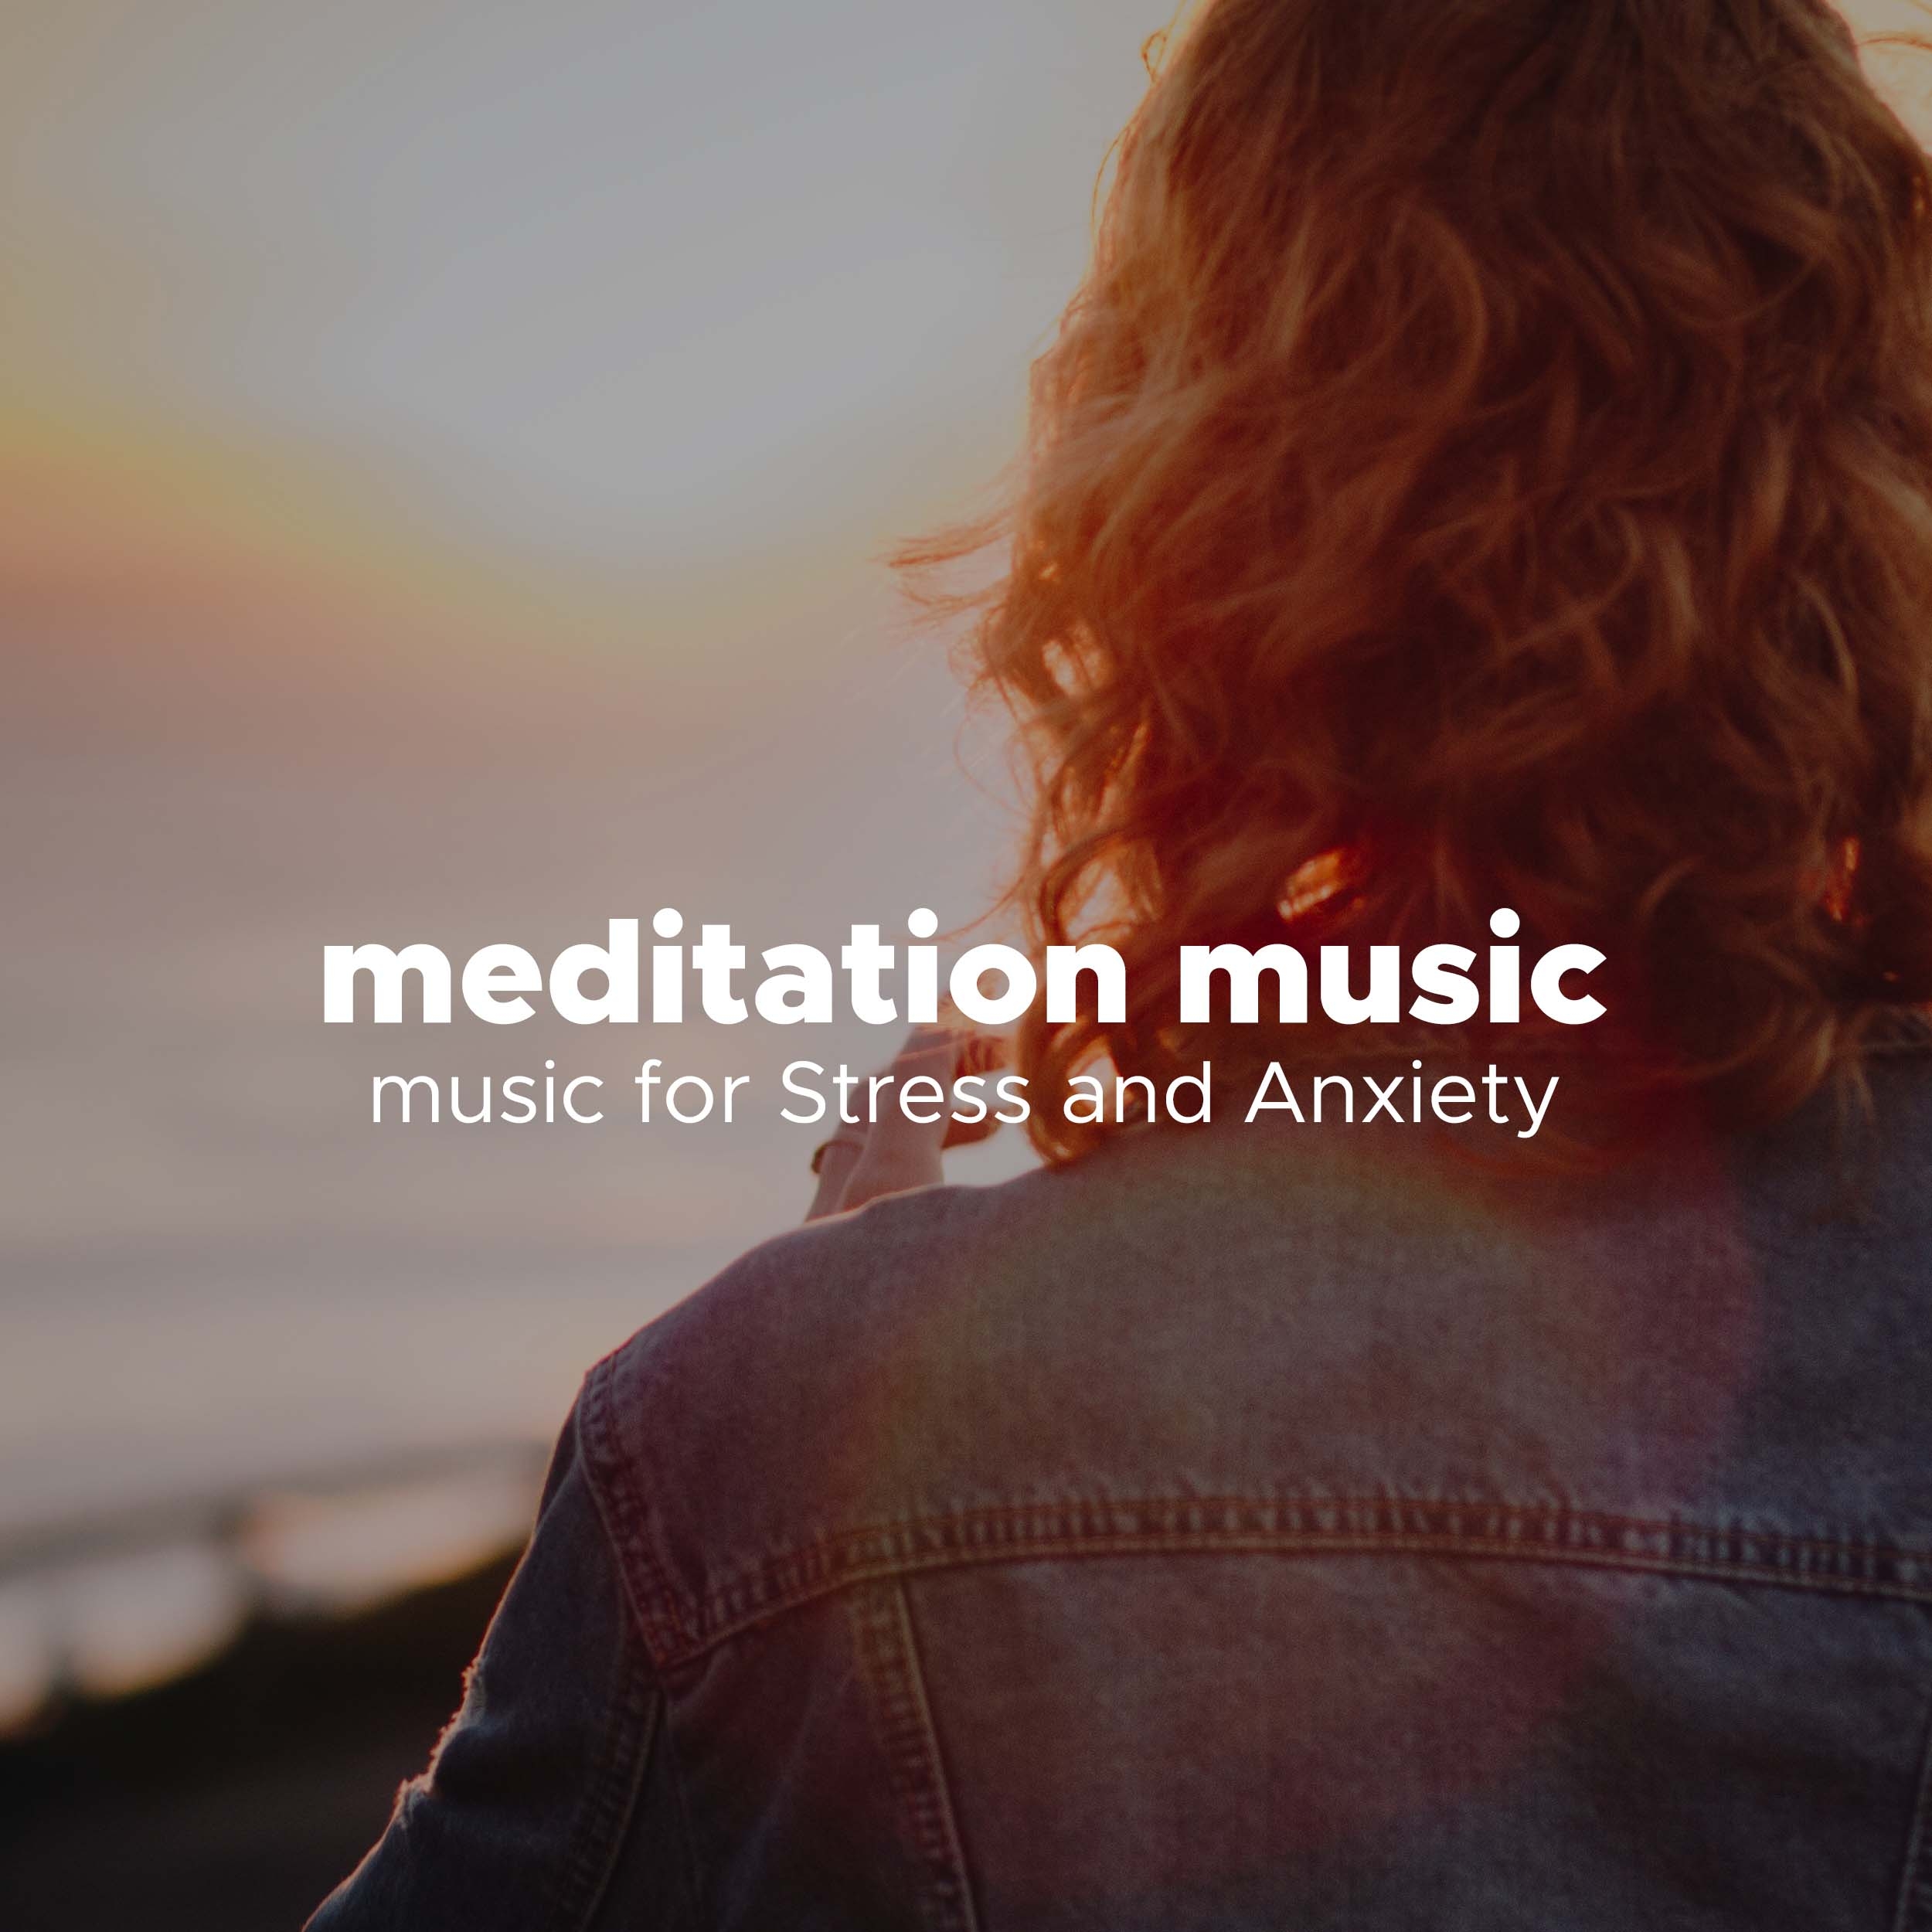 Meditation Music - music for Stress and Anxiety